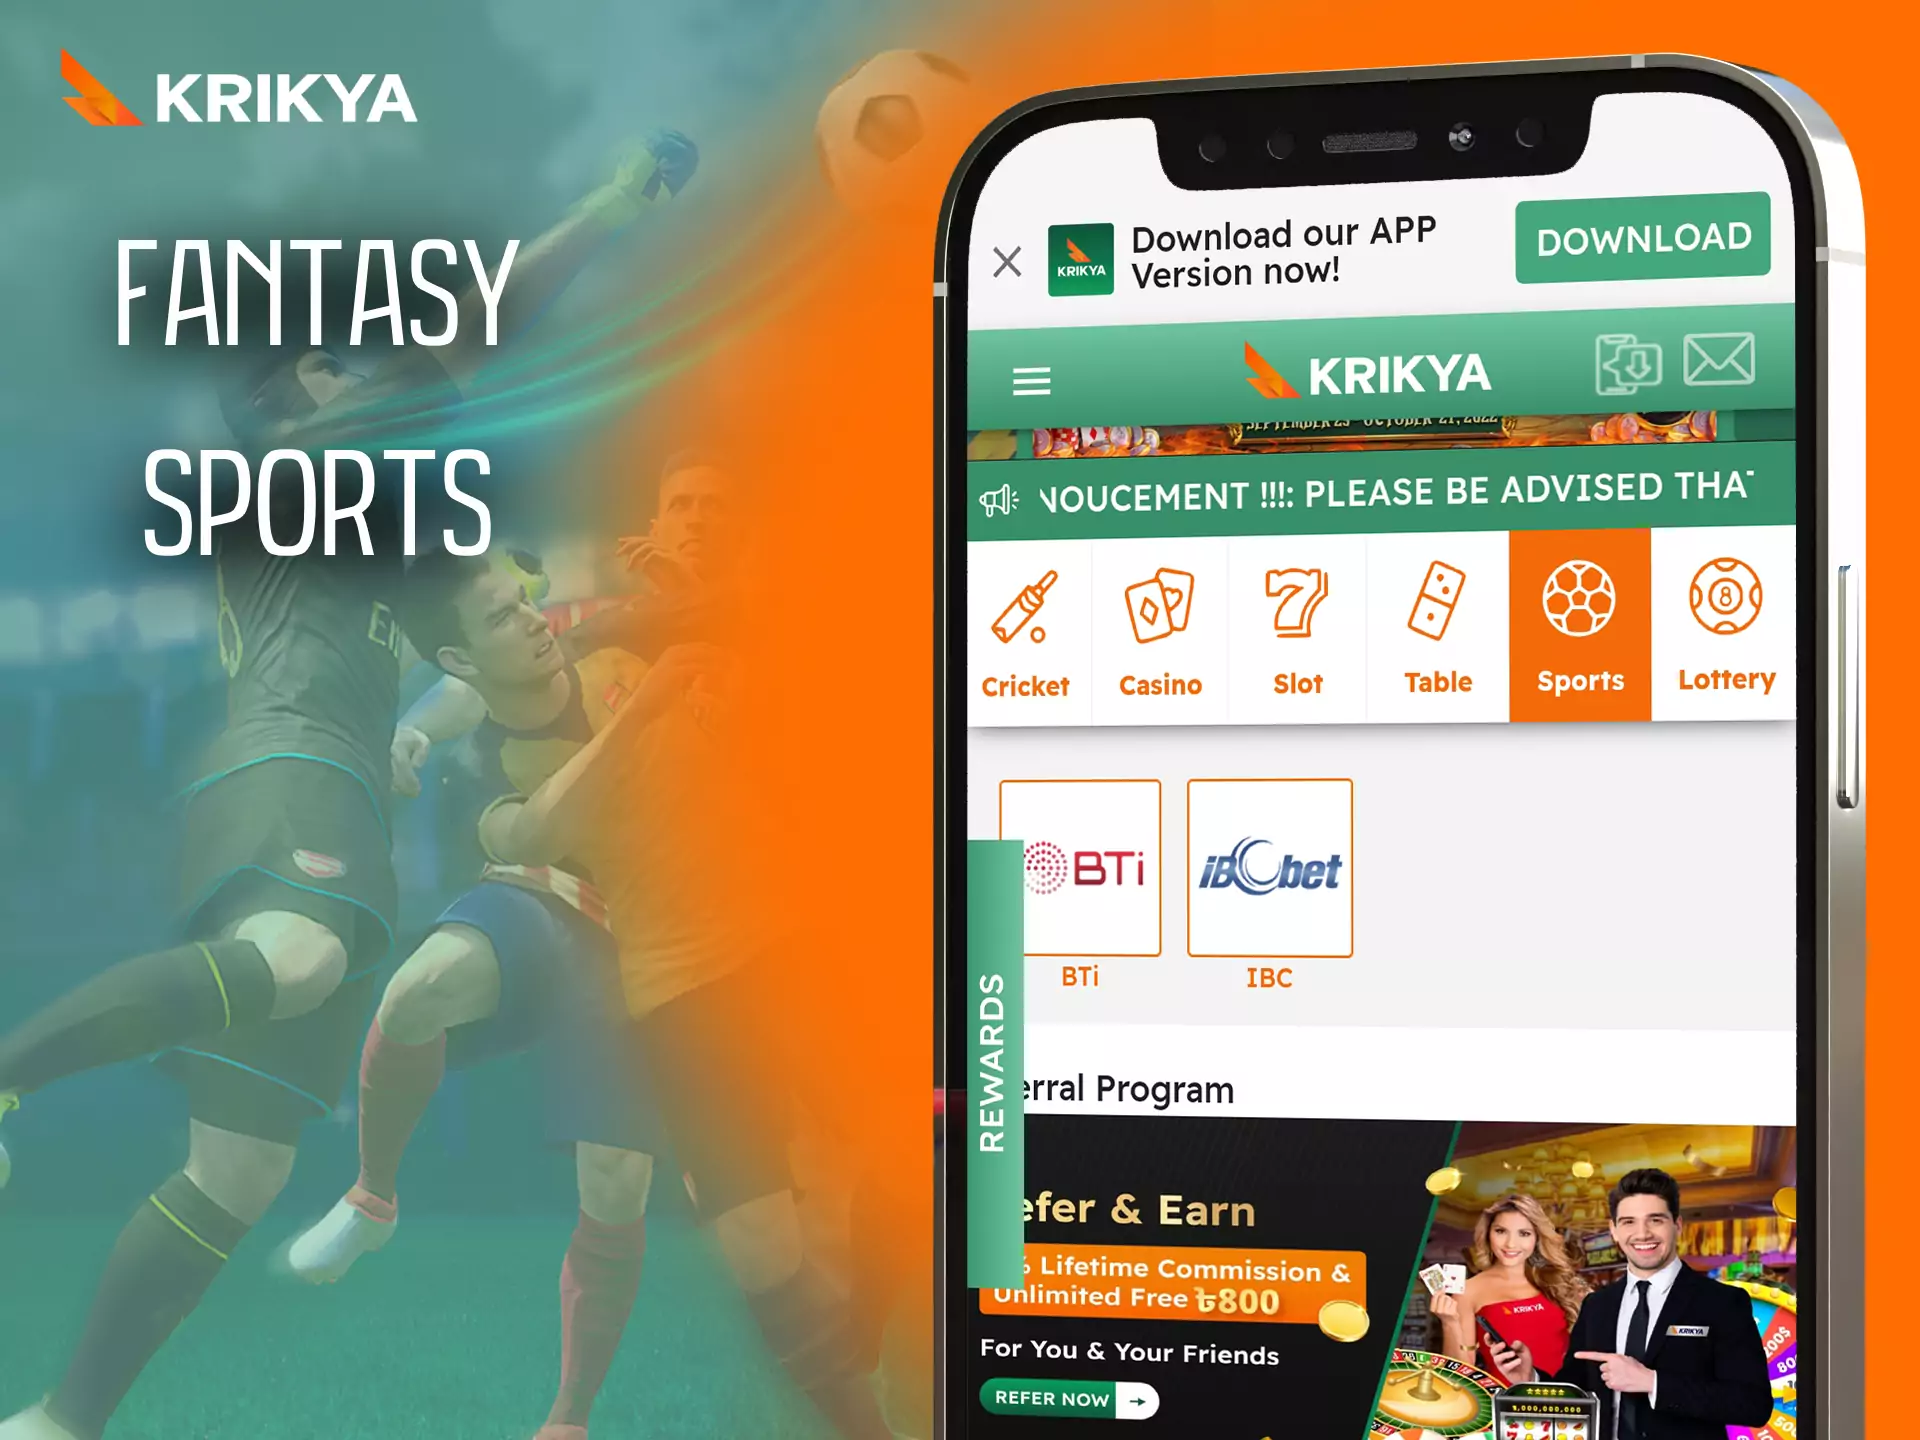 In the Krikya app, place bets on fantasy sports and choose the conditions yourself.